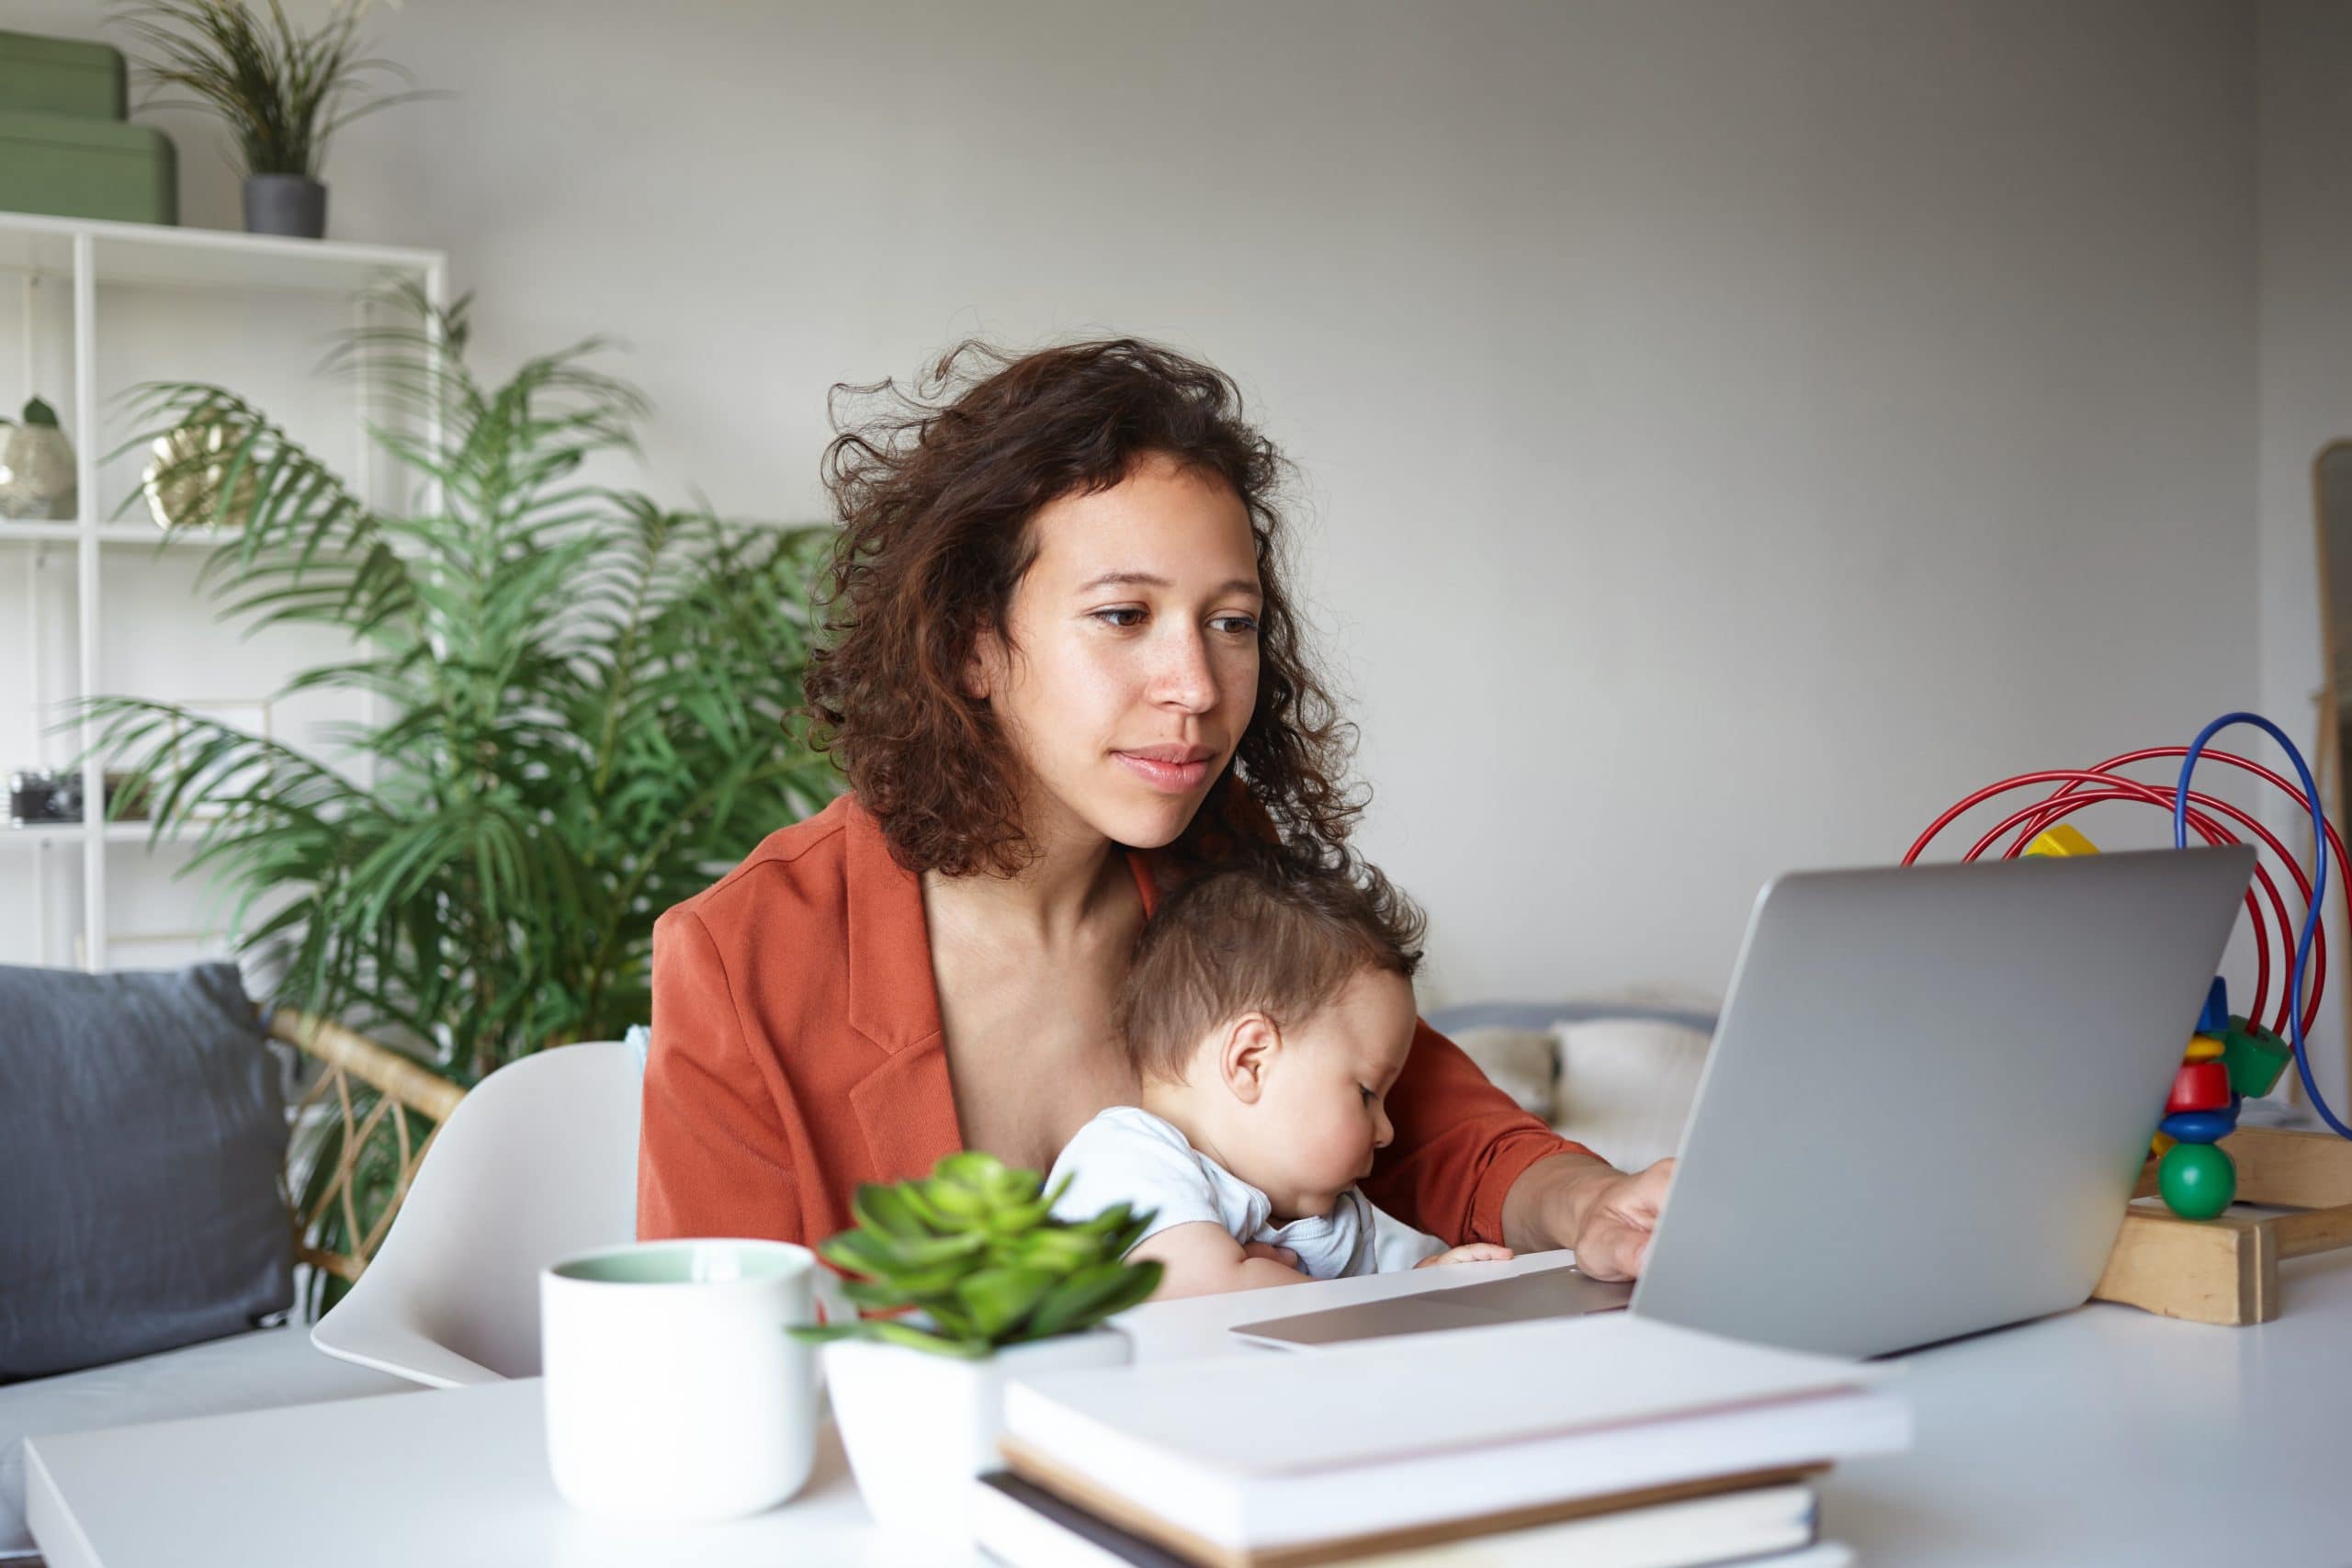 COVID-19 helpful tips if you are separated. Accompanying image: single mother nursing baby and looking for job online